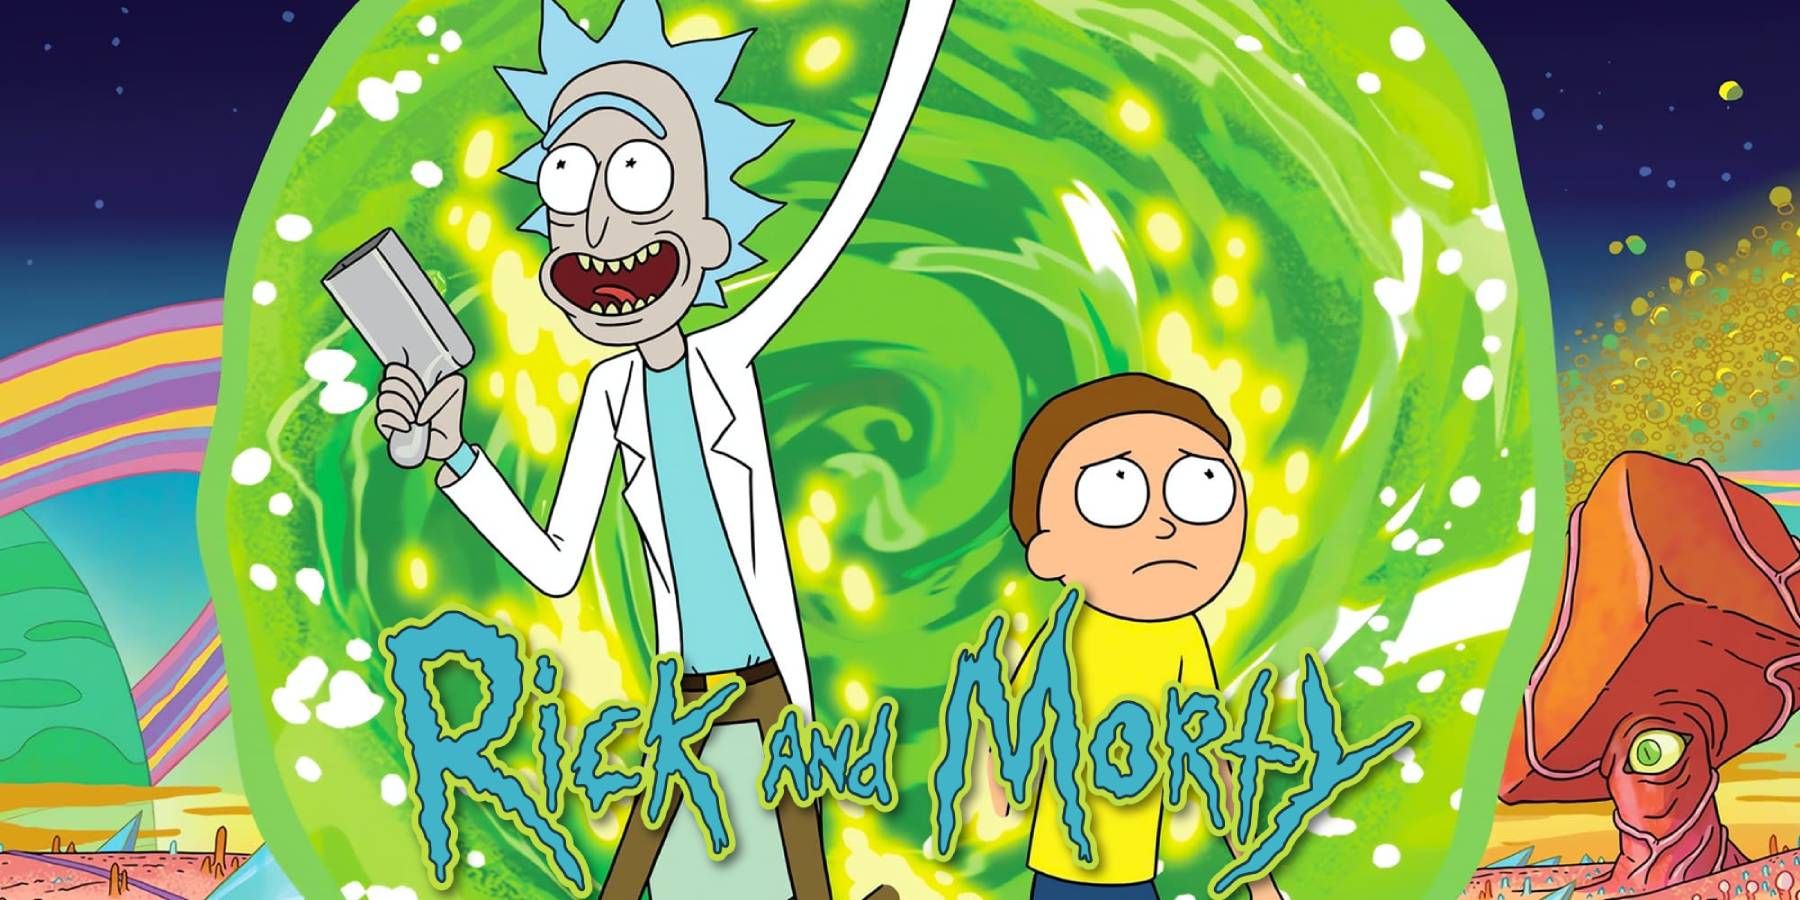 Cropped poster of the show Rick and Morty featuring an excited Rick Sanchez and worried Morty Smith coming out of a portal